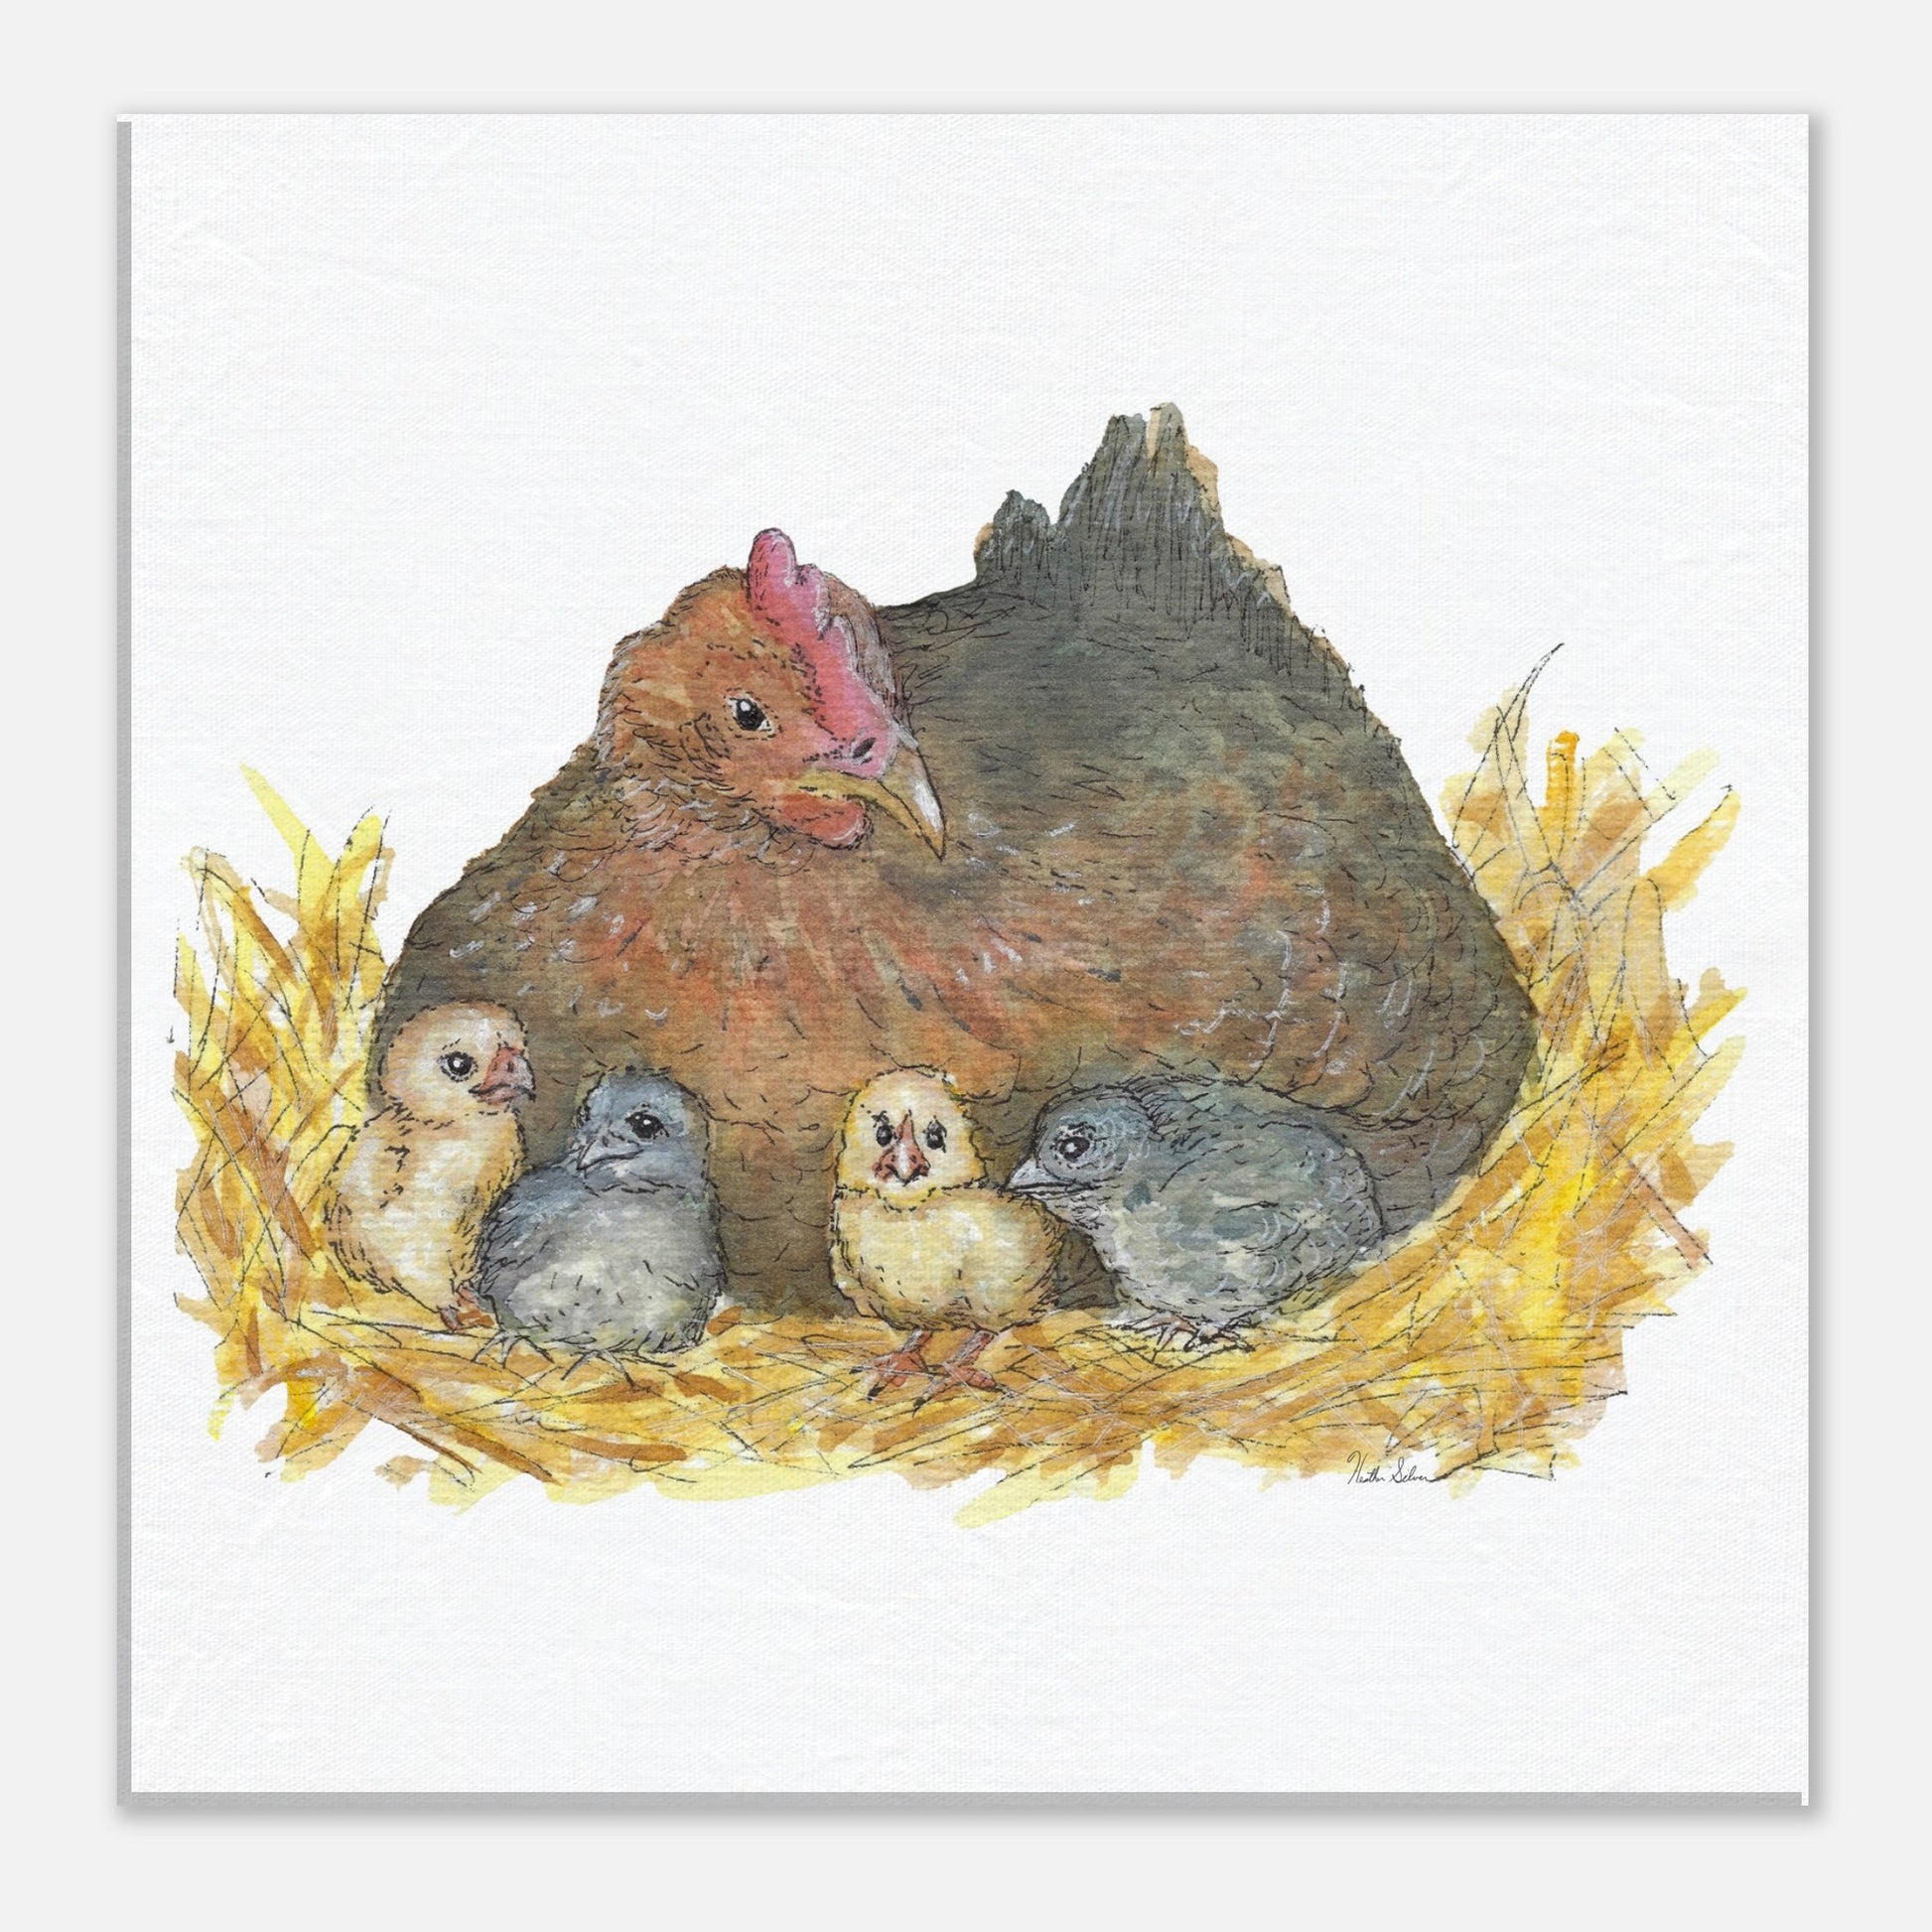 24 by 24 inch slim canvas Mother Hen print. Features a watercolor mother hen and her four chicks in a nest.